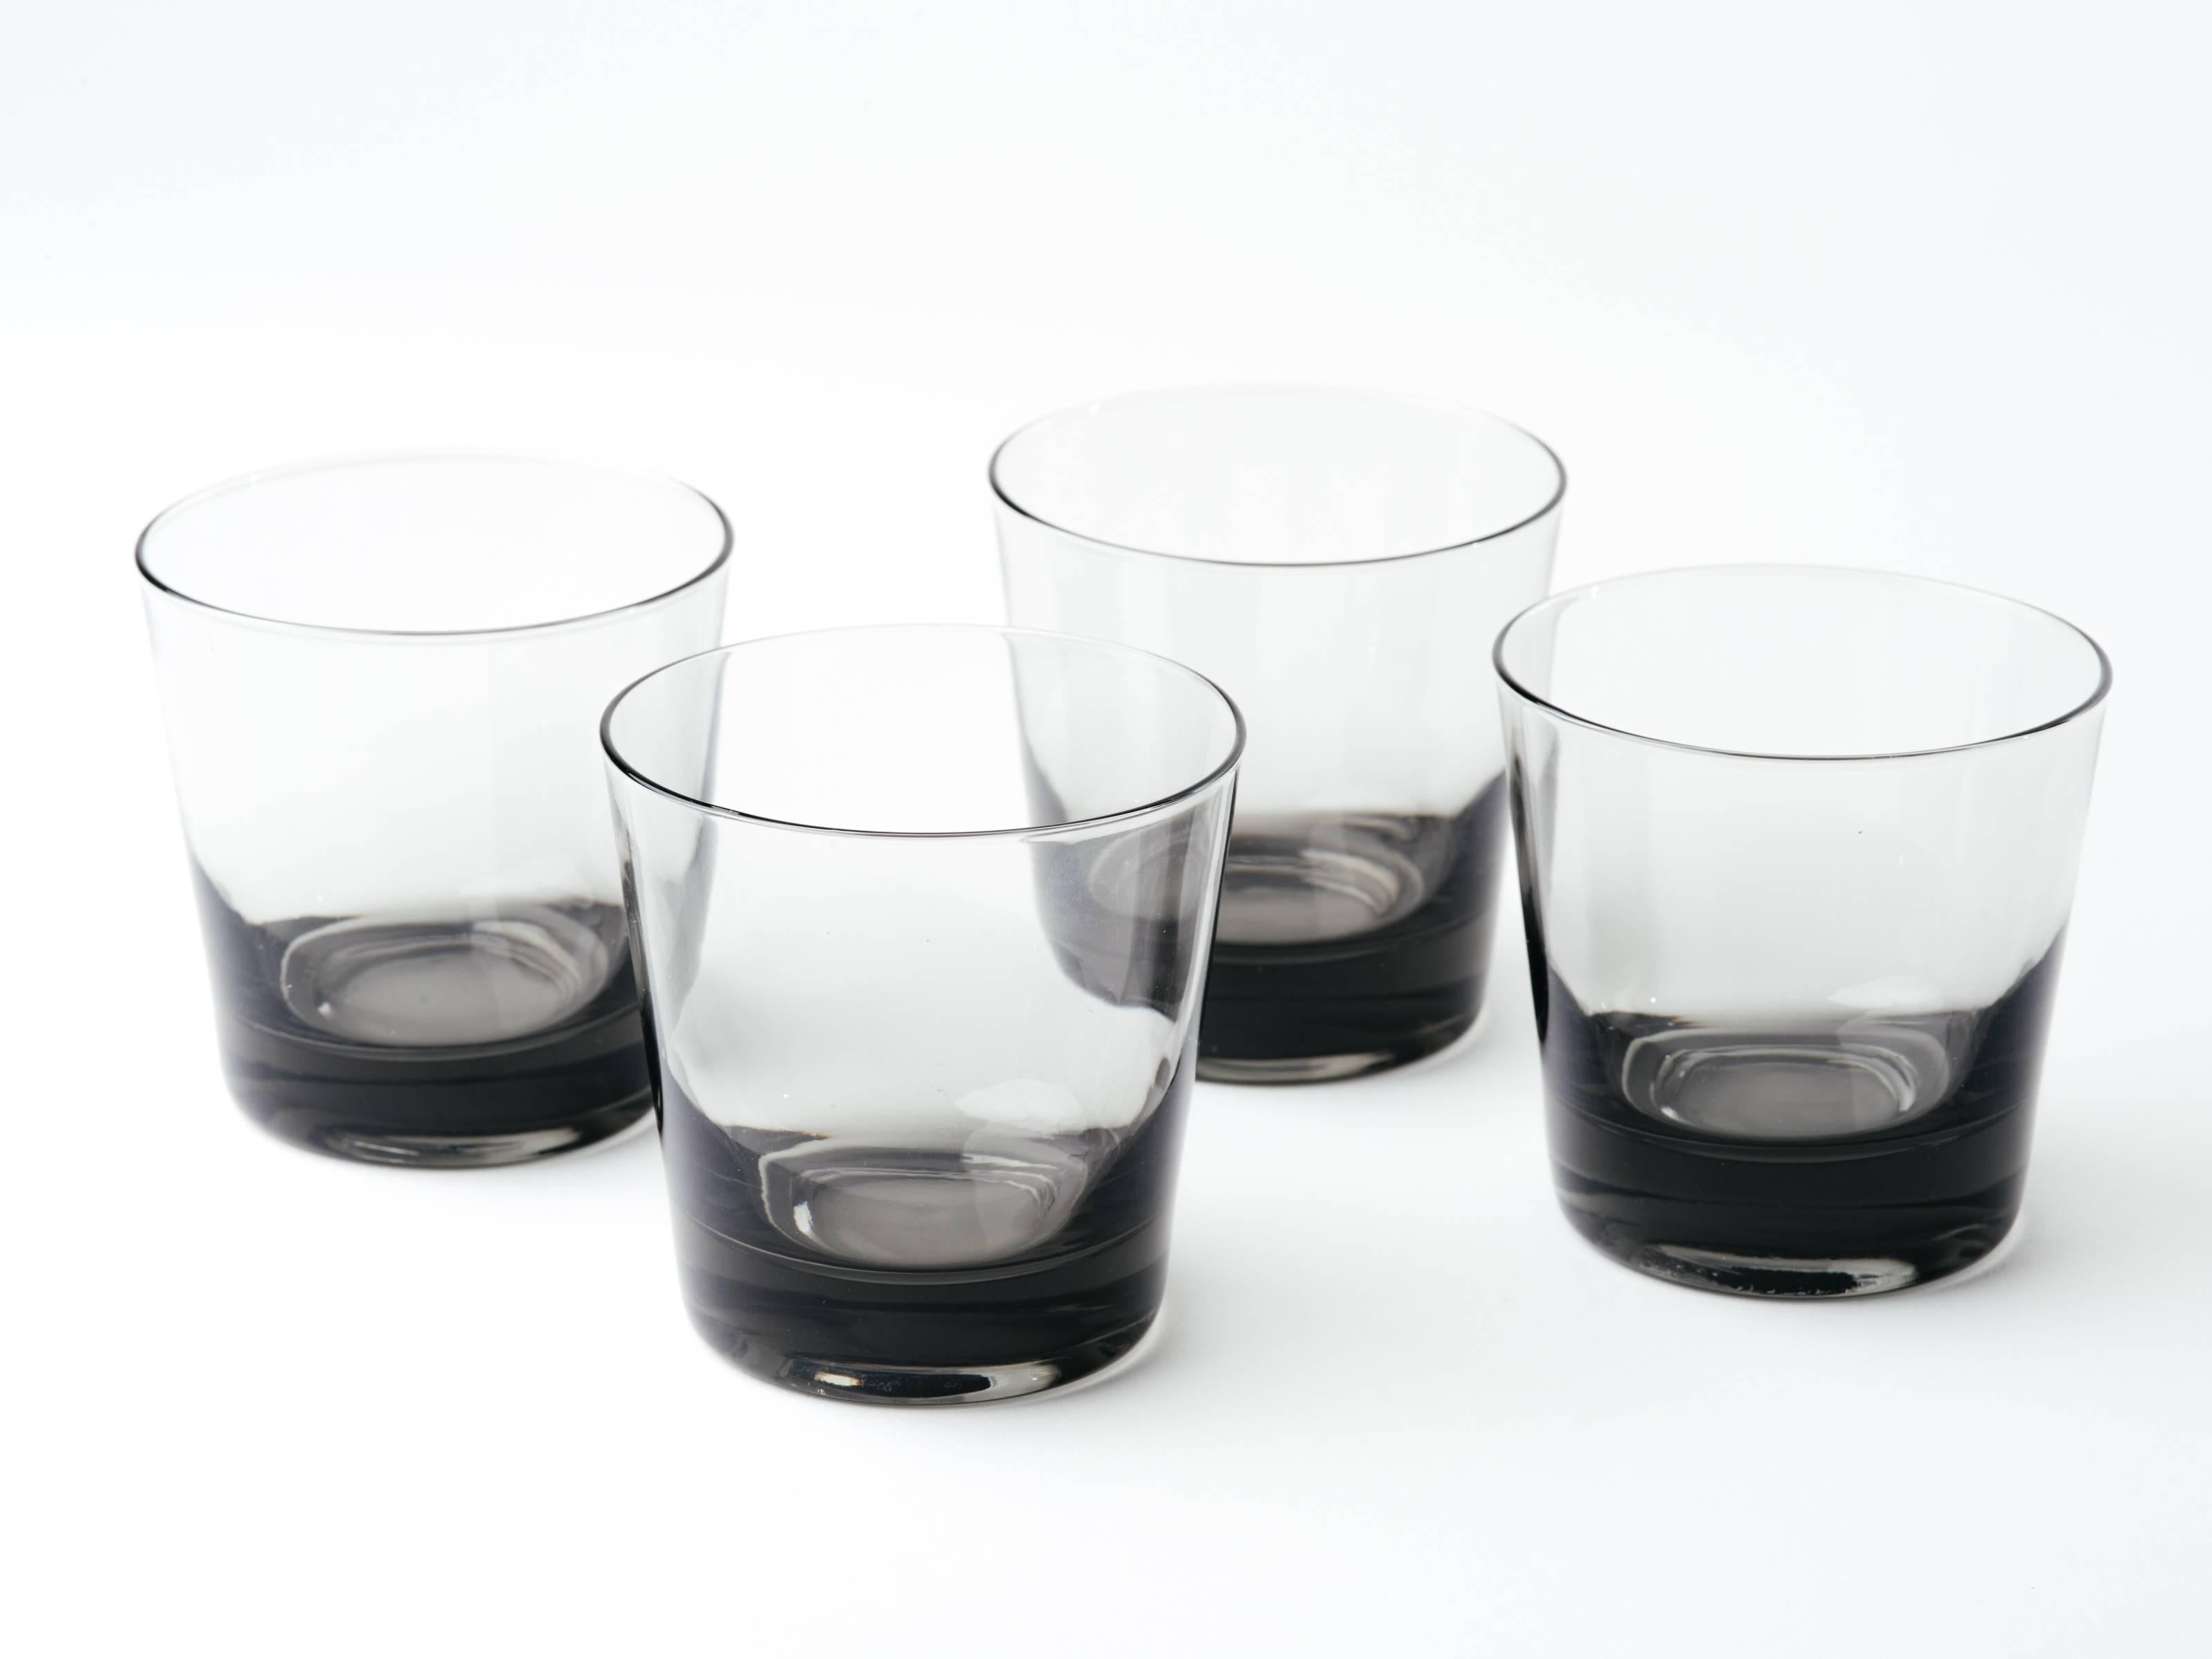 Set of four Scandinavian Modern double old fashion cocktail glasses. Handblown in hues of smoked grey or translucent black.